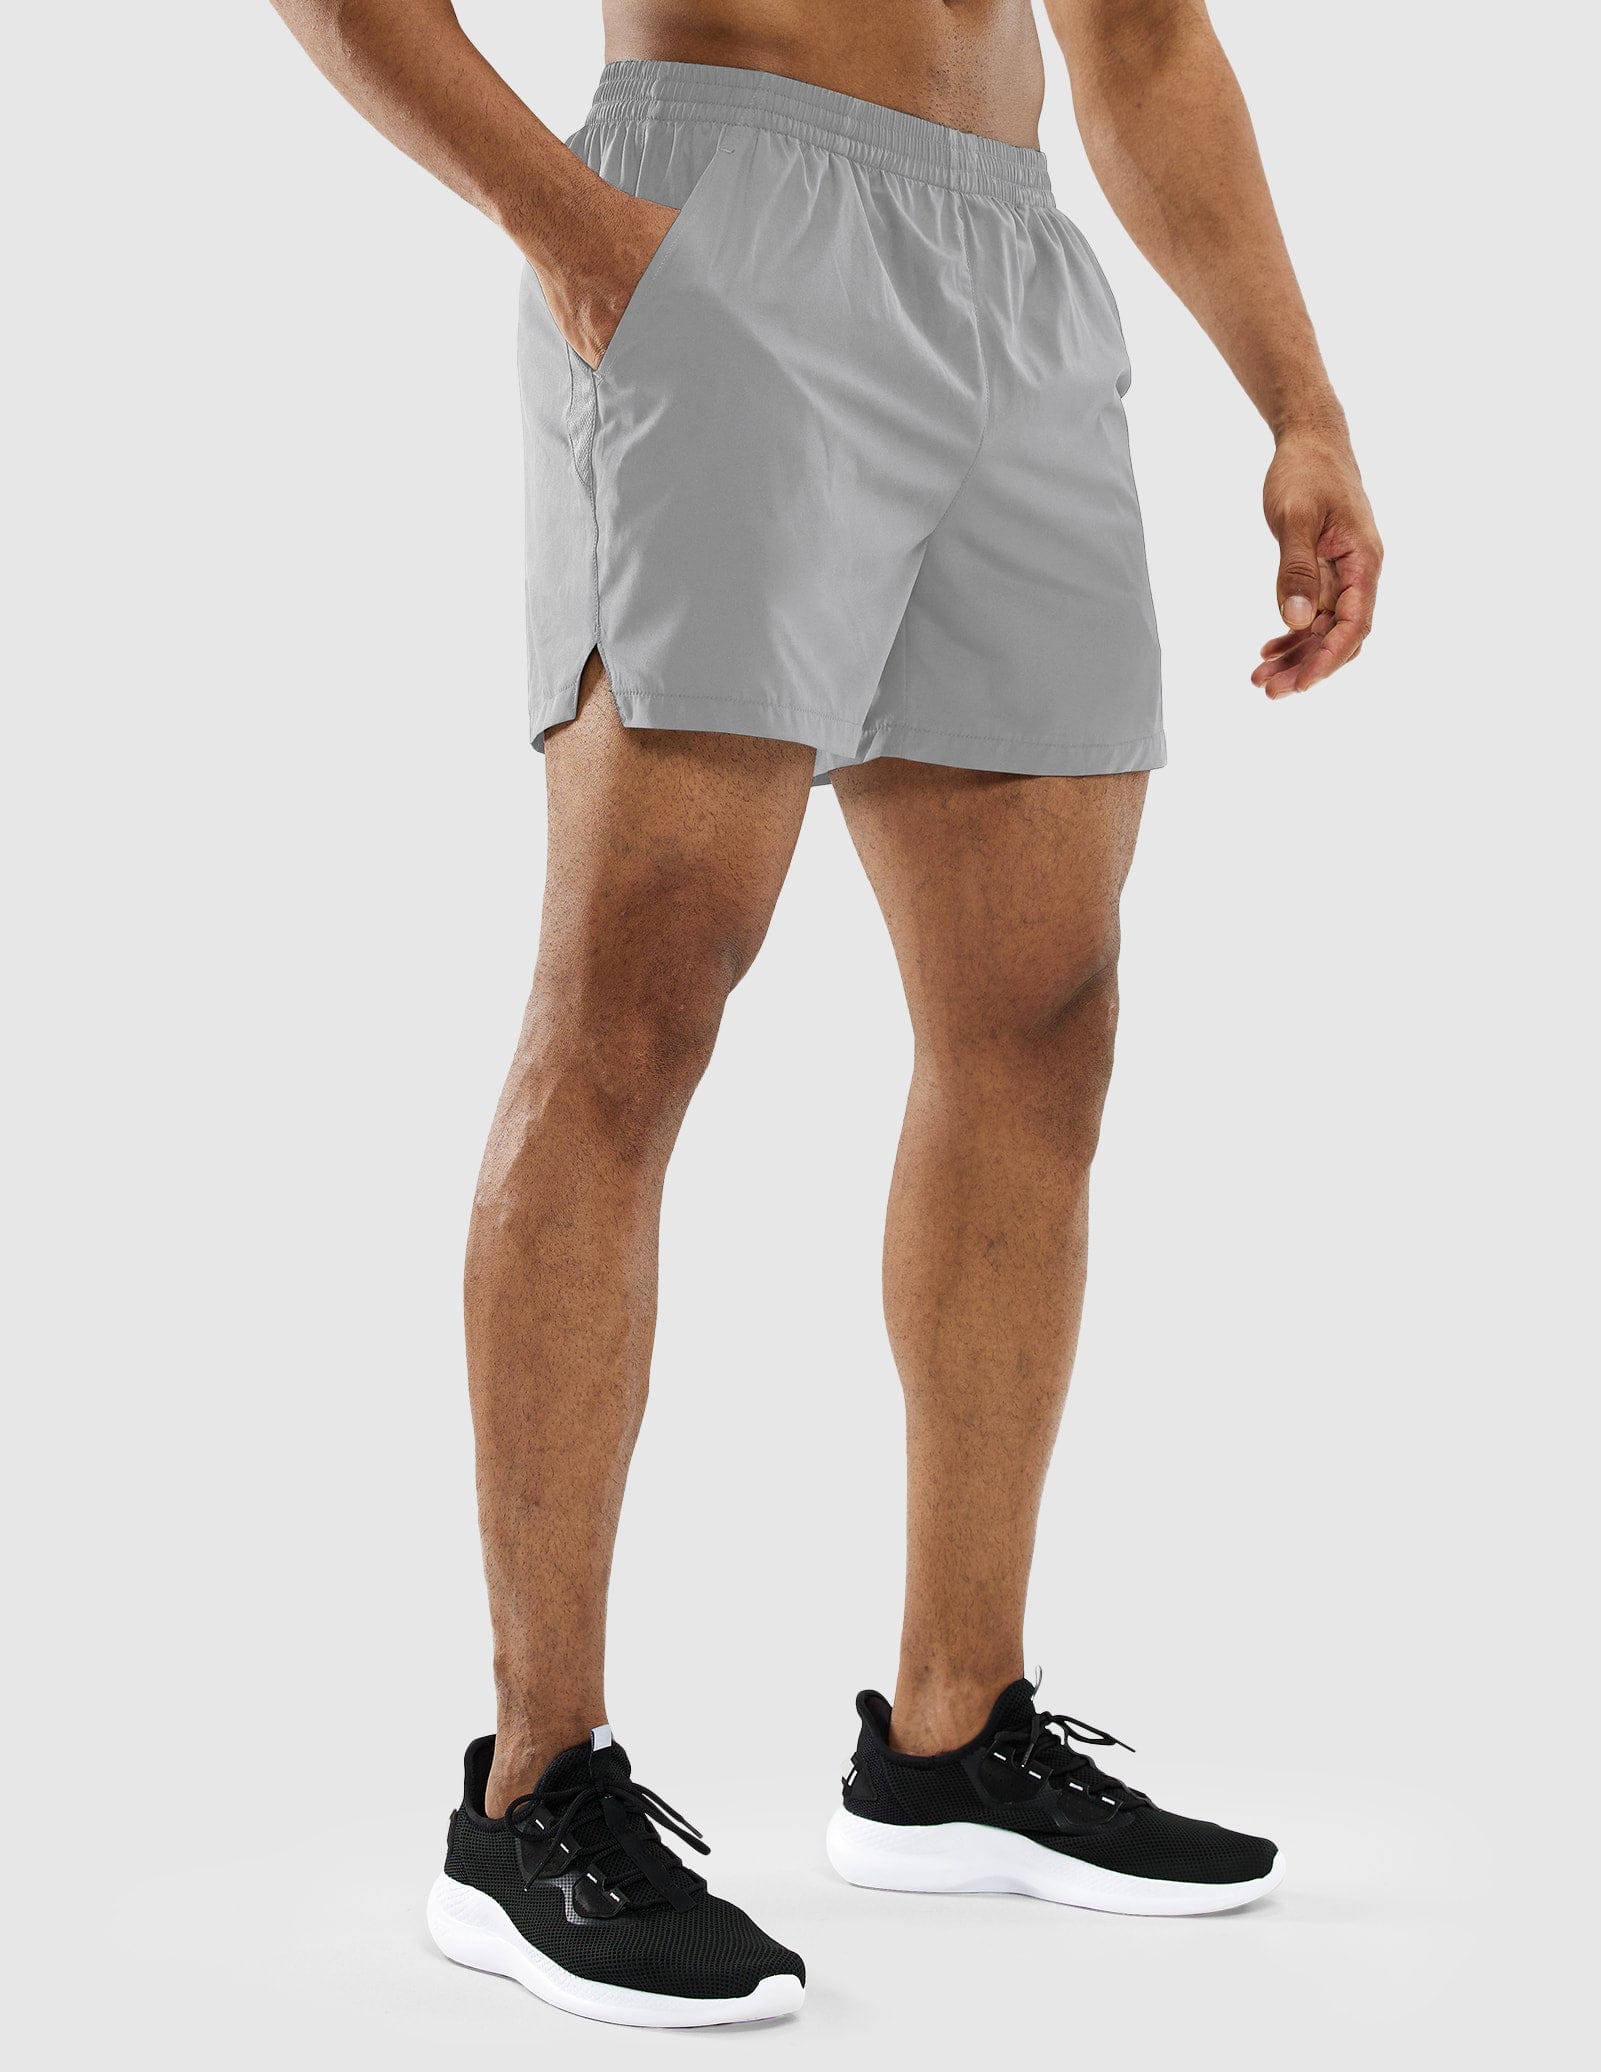 Men's Workout Shorts 5 Inches Running Shorts with Pockets Men's Shorts MIER